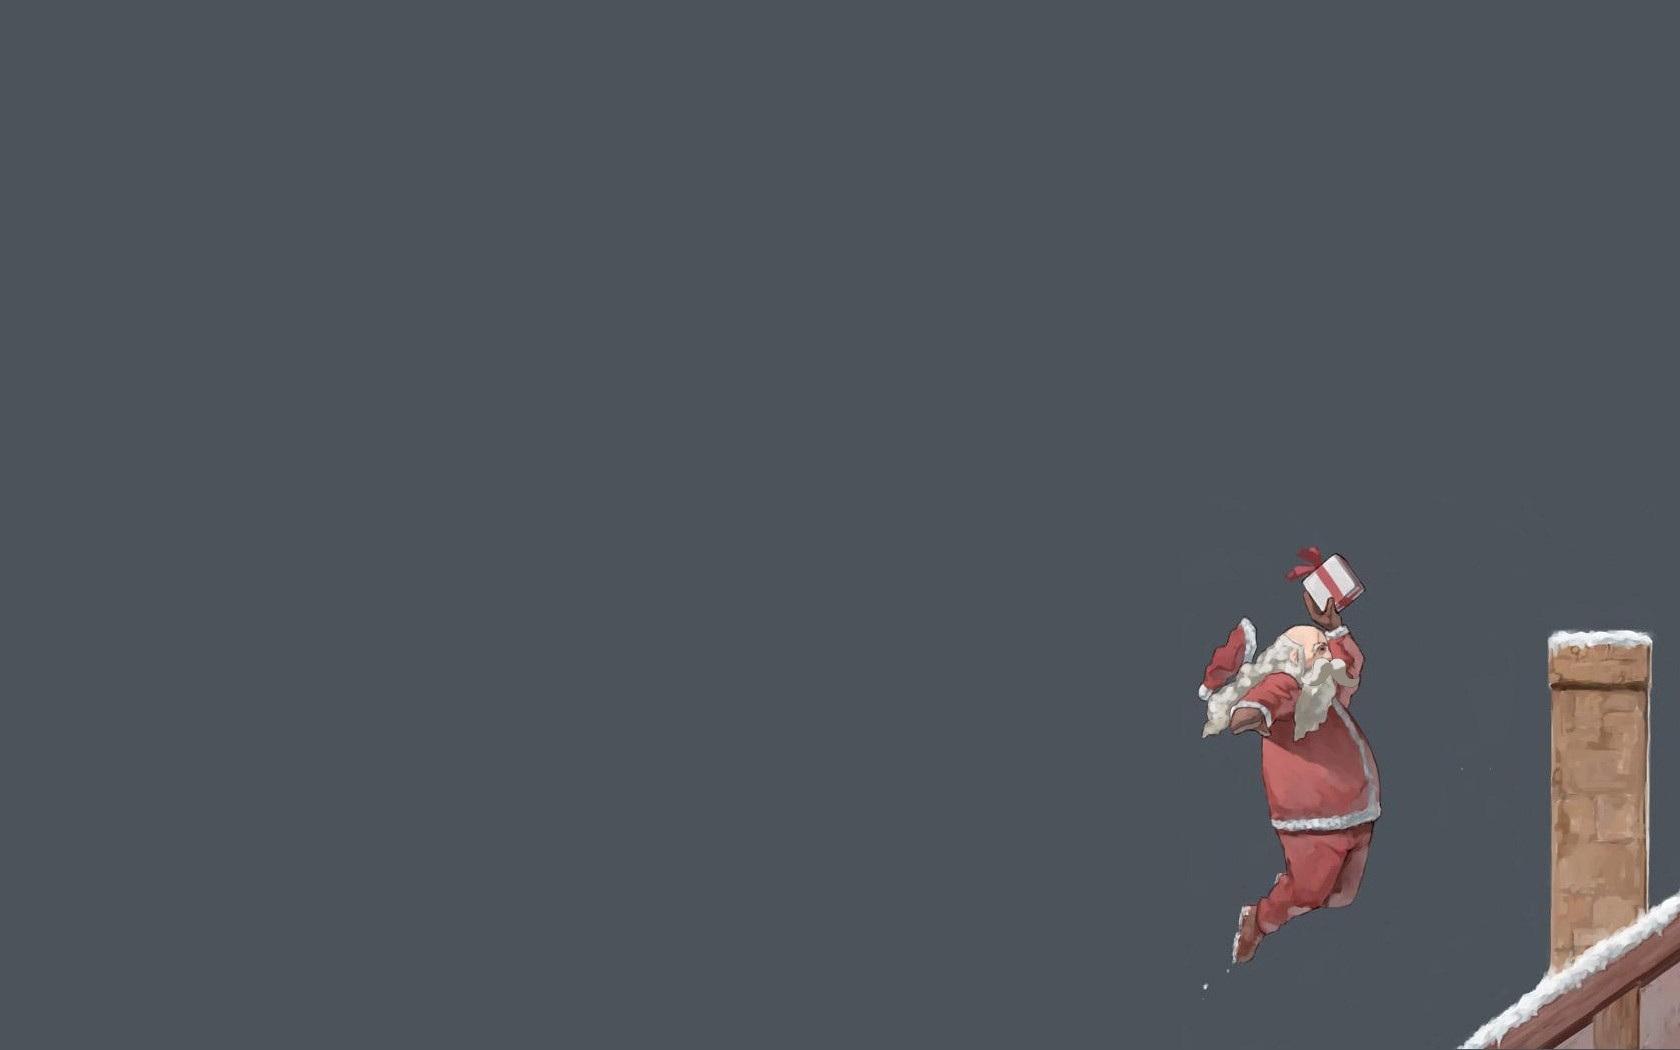 General 1680x1050 New Year Santa Claus Christmas rooftops chimneys gray background simple background